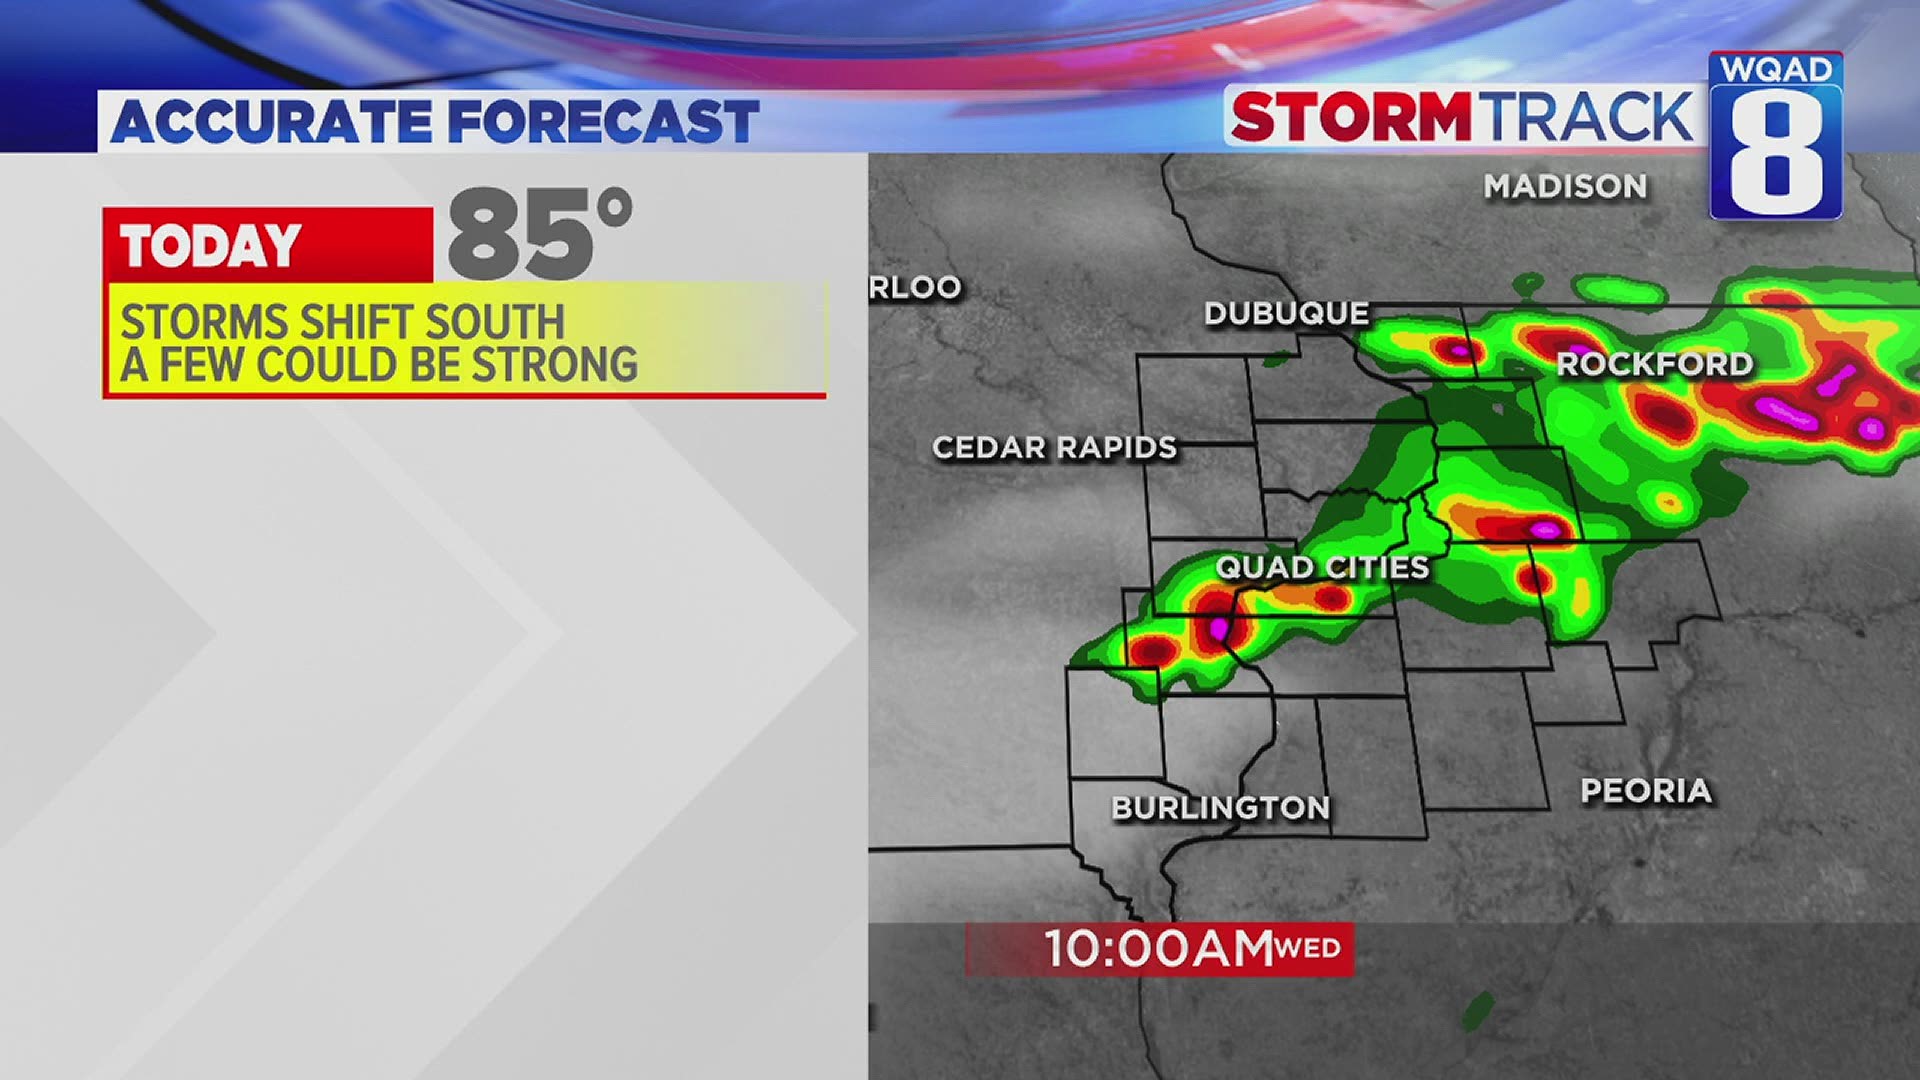 Showers and storms possible today.